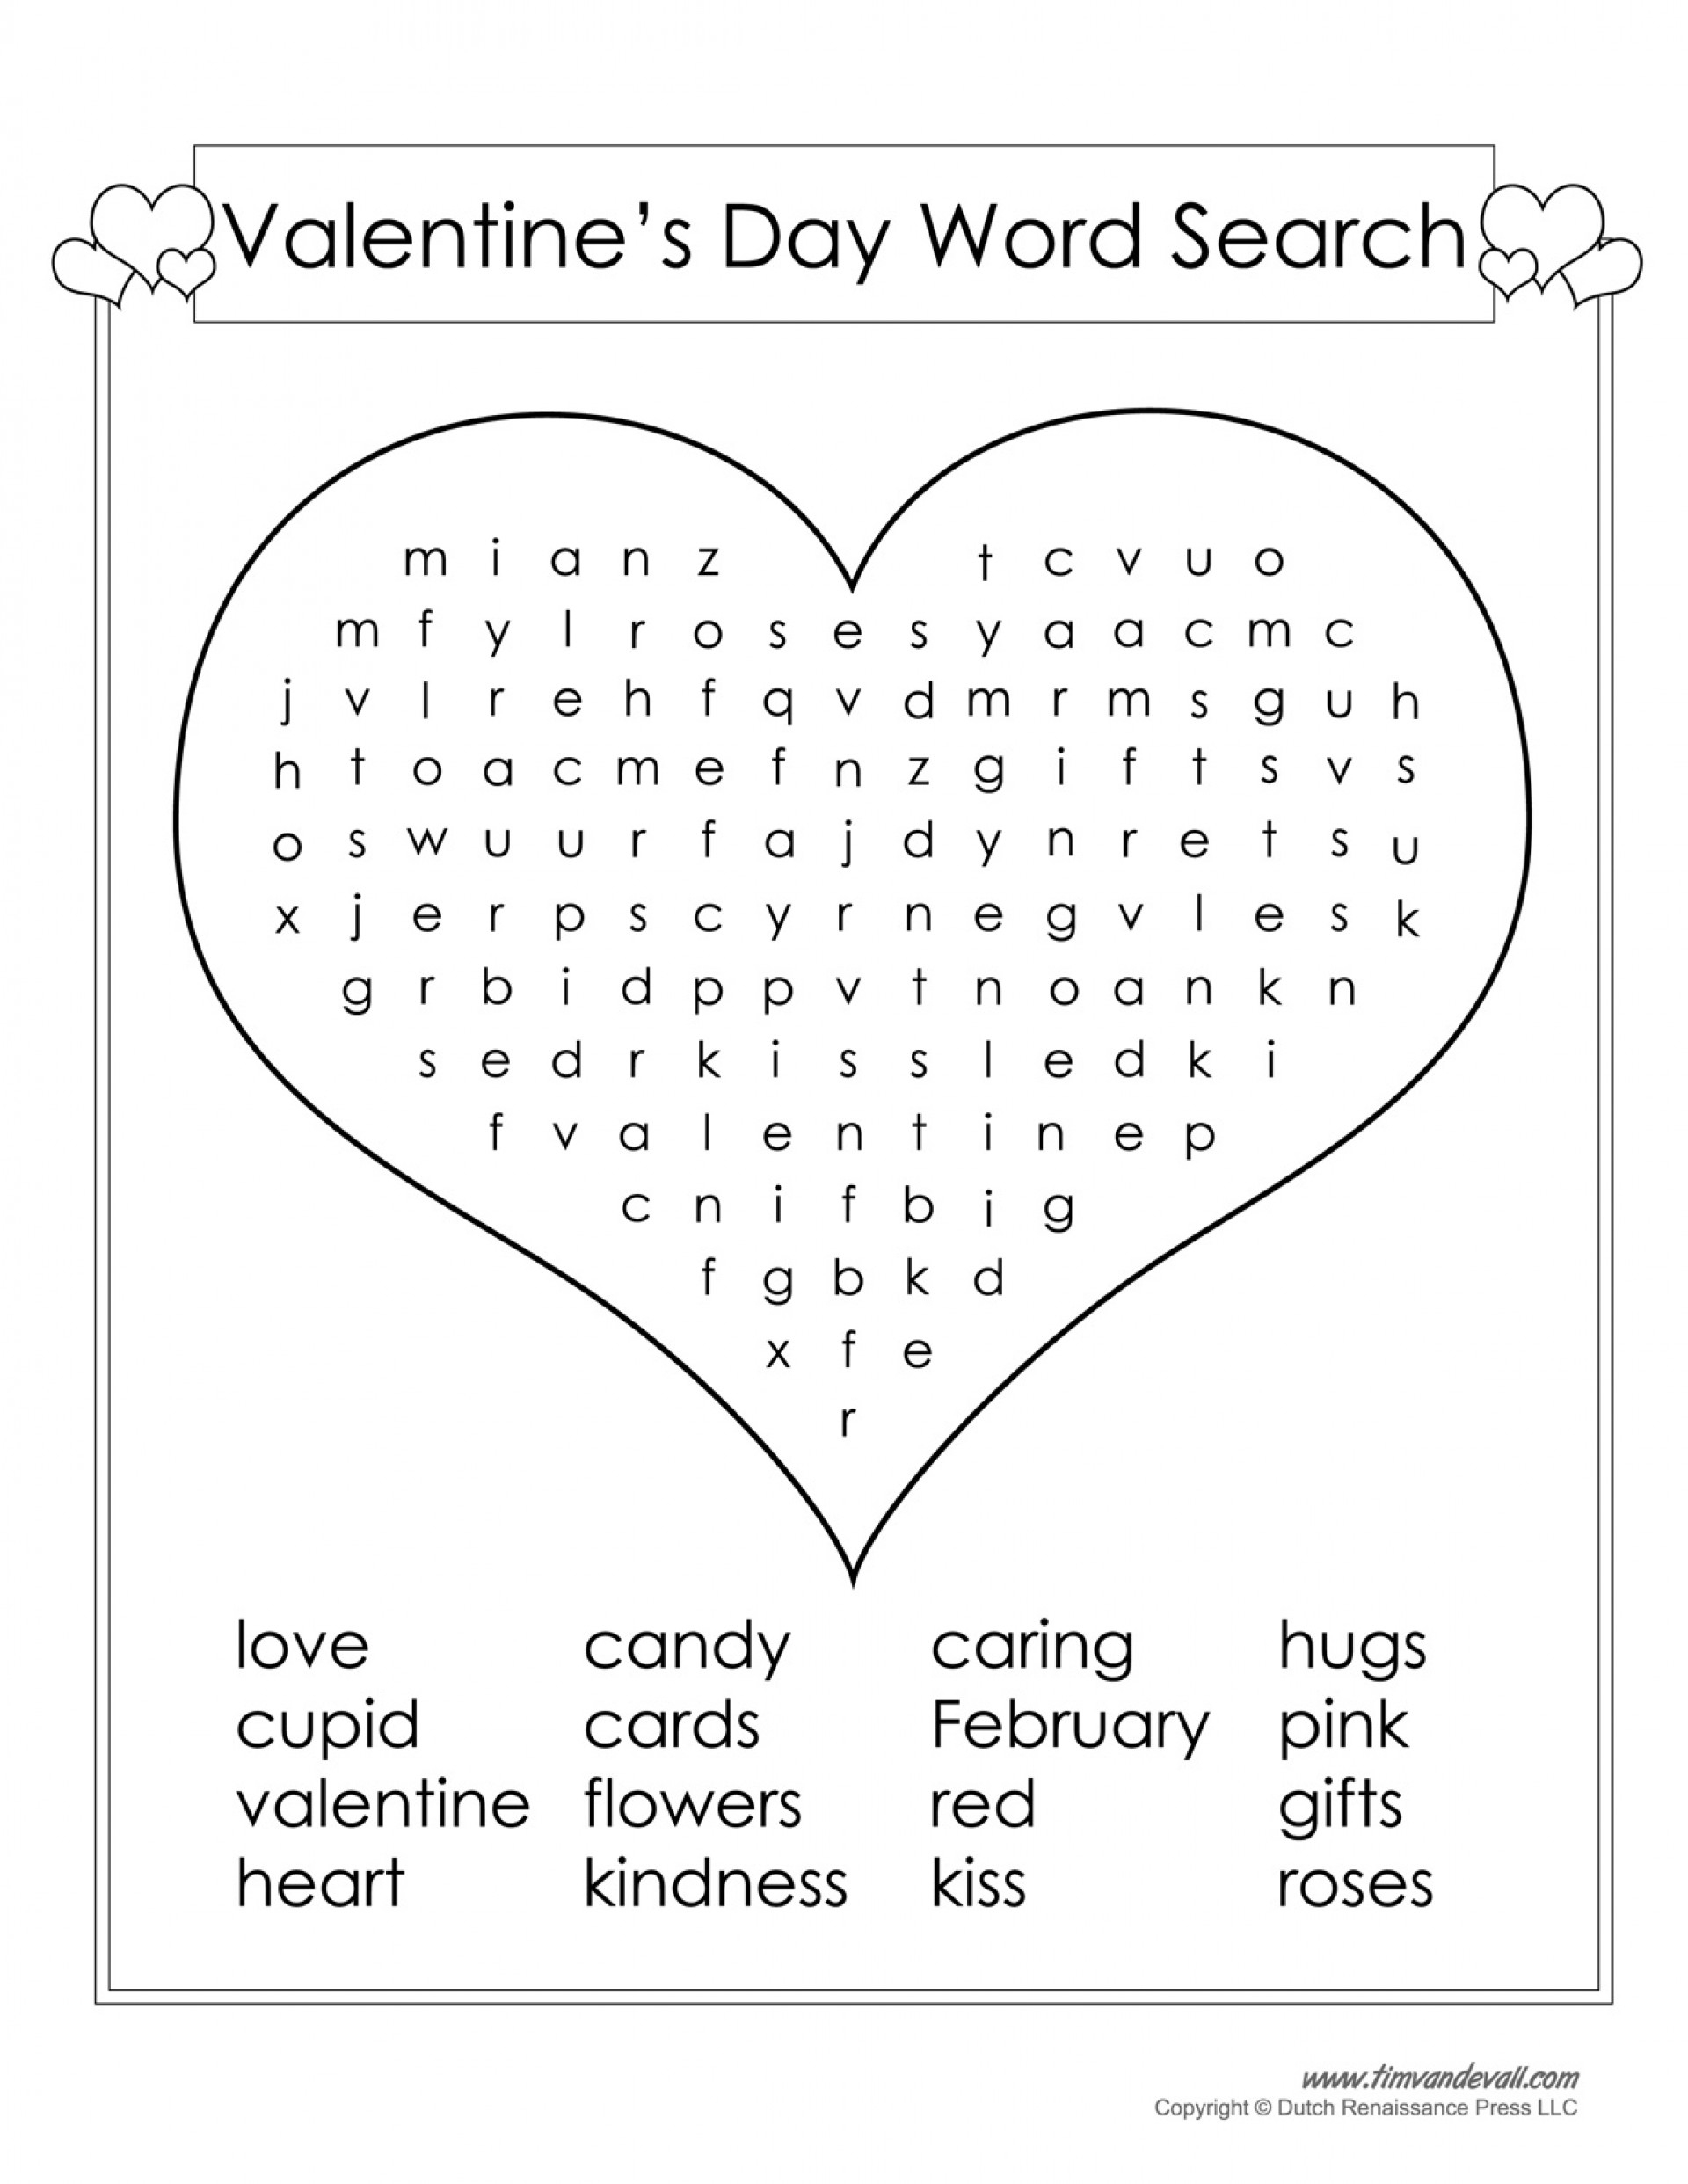 Valentines Day Word Search Large Light Pink Valentine S Crossword - Free Printable Valentine Word Search For Adults